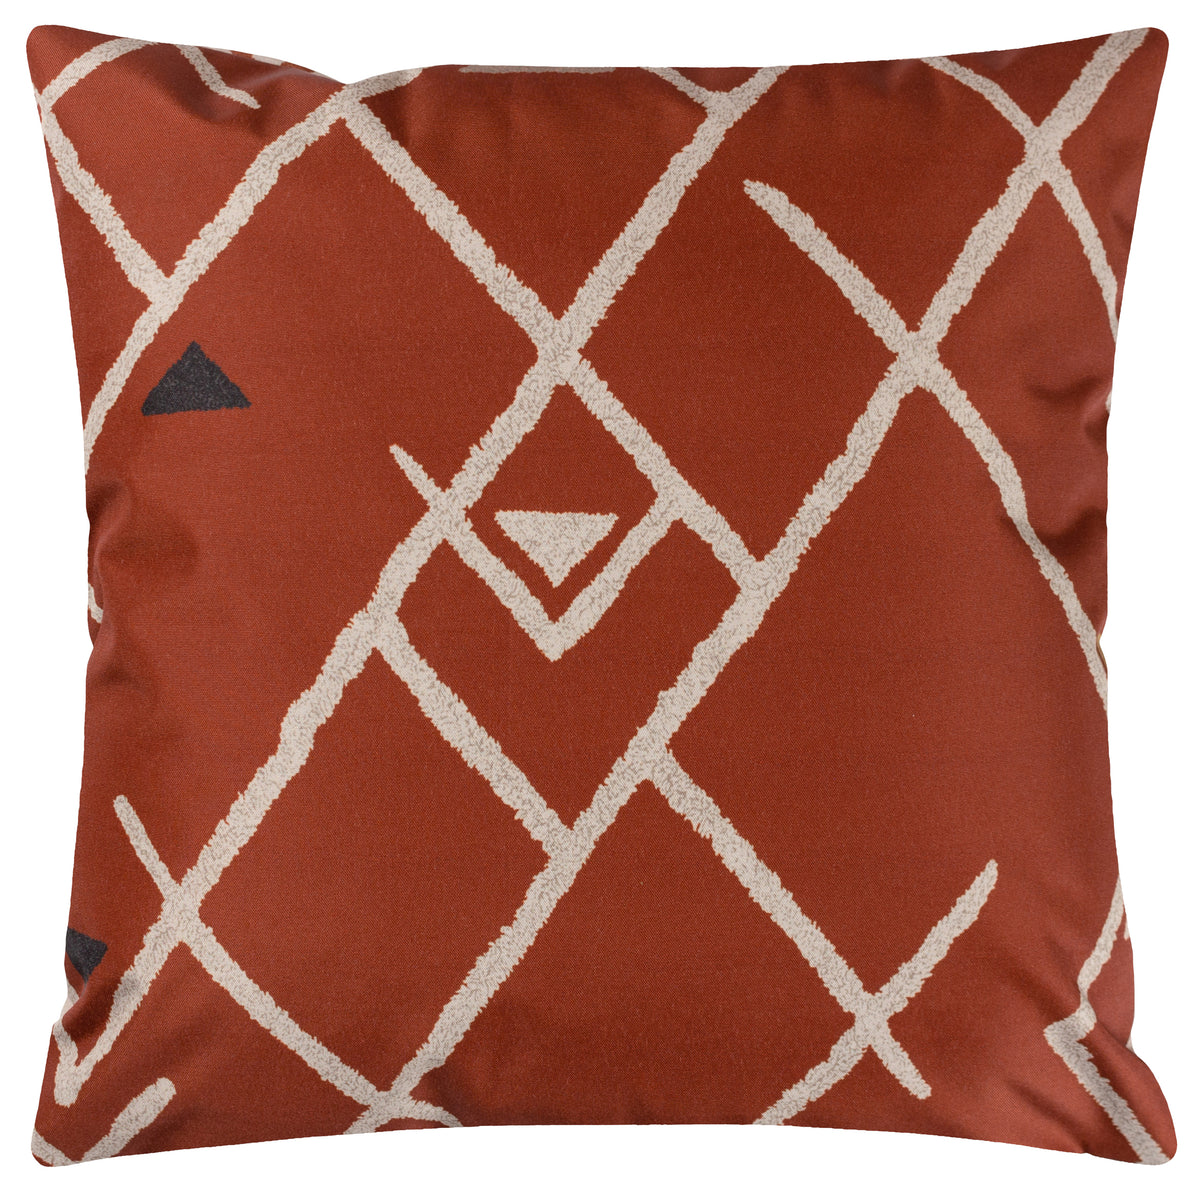 Inka 43cm Reversible Outdoor Polyester Cushion